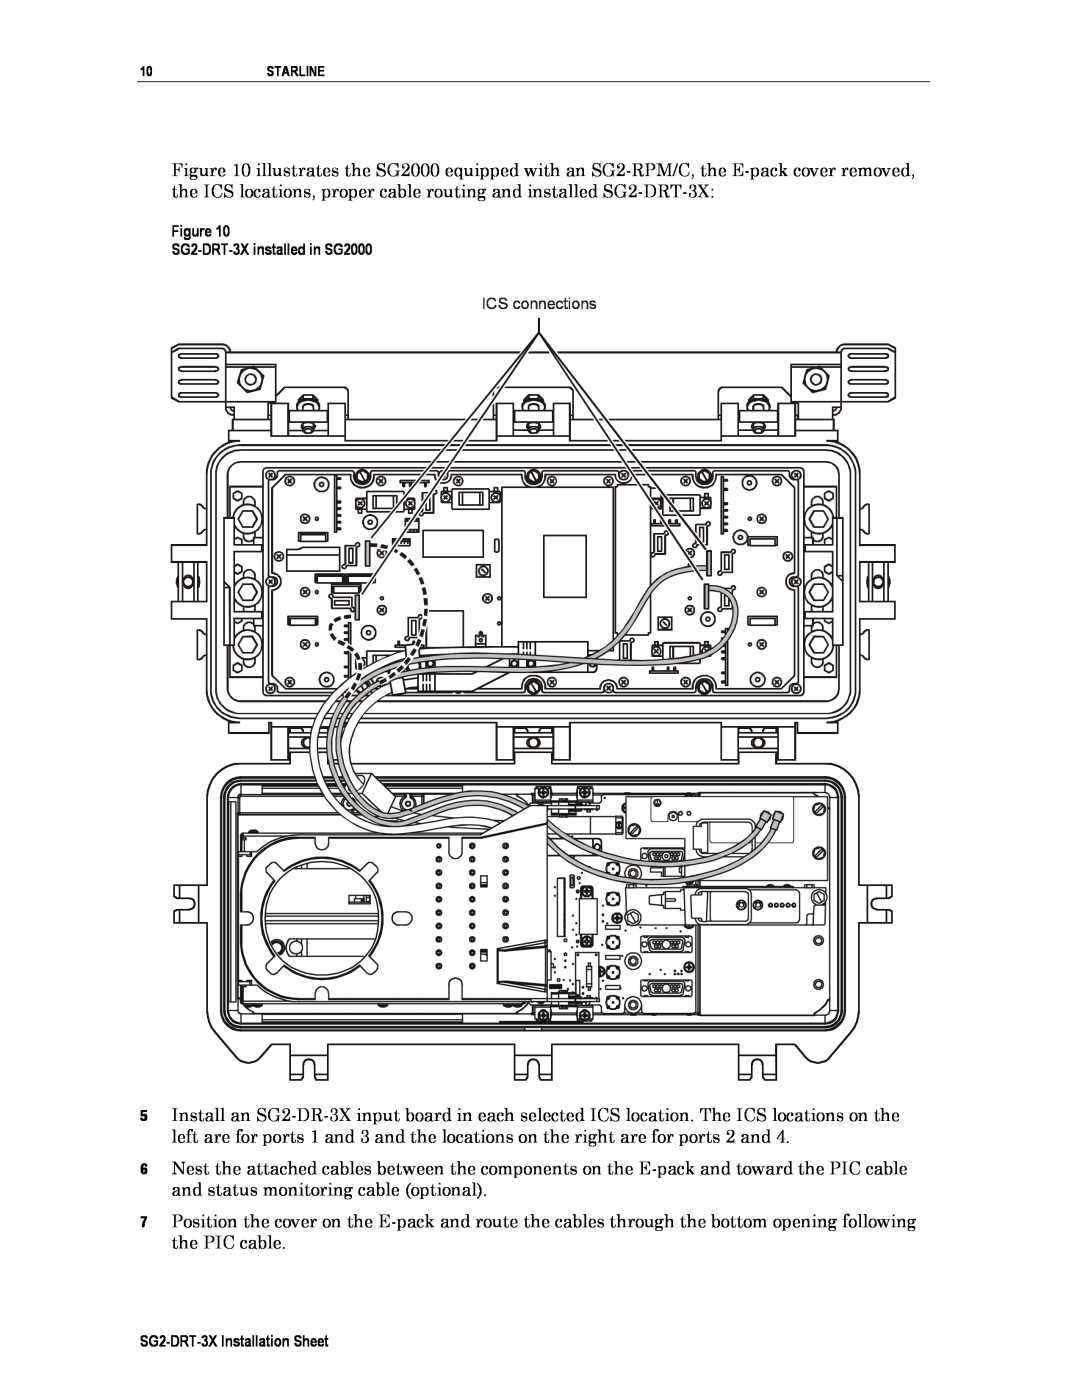 Cuisinart operation manual Figure SG2-DRT-3Xinstalled in SG2000, ICS connections, SG2-DRT-3XInstallation Sheet 